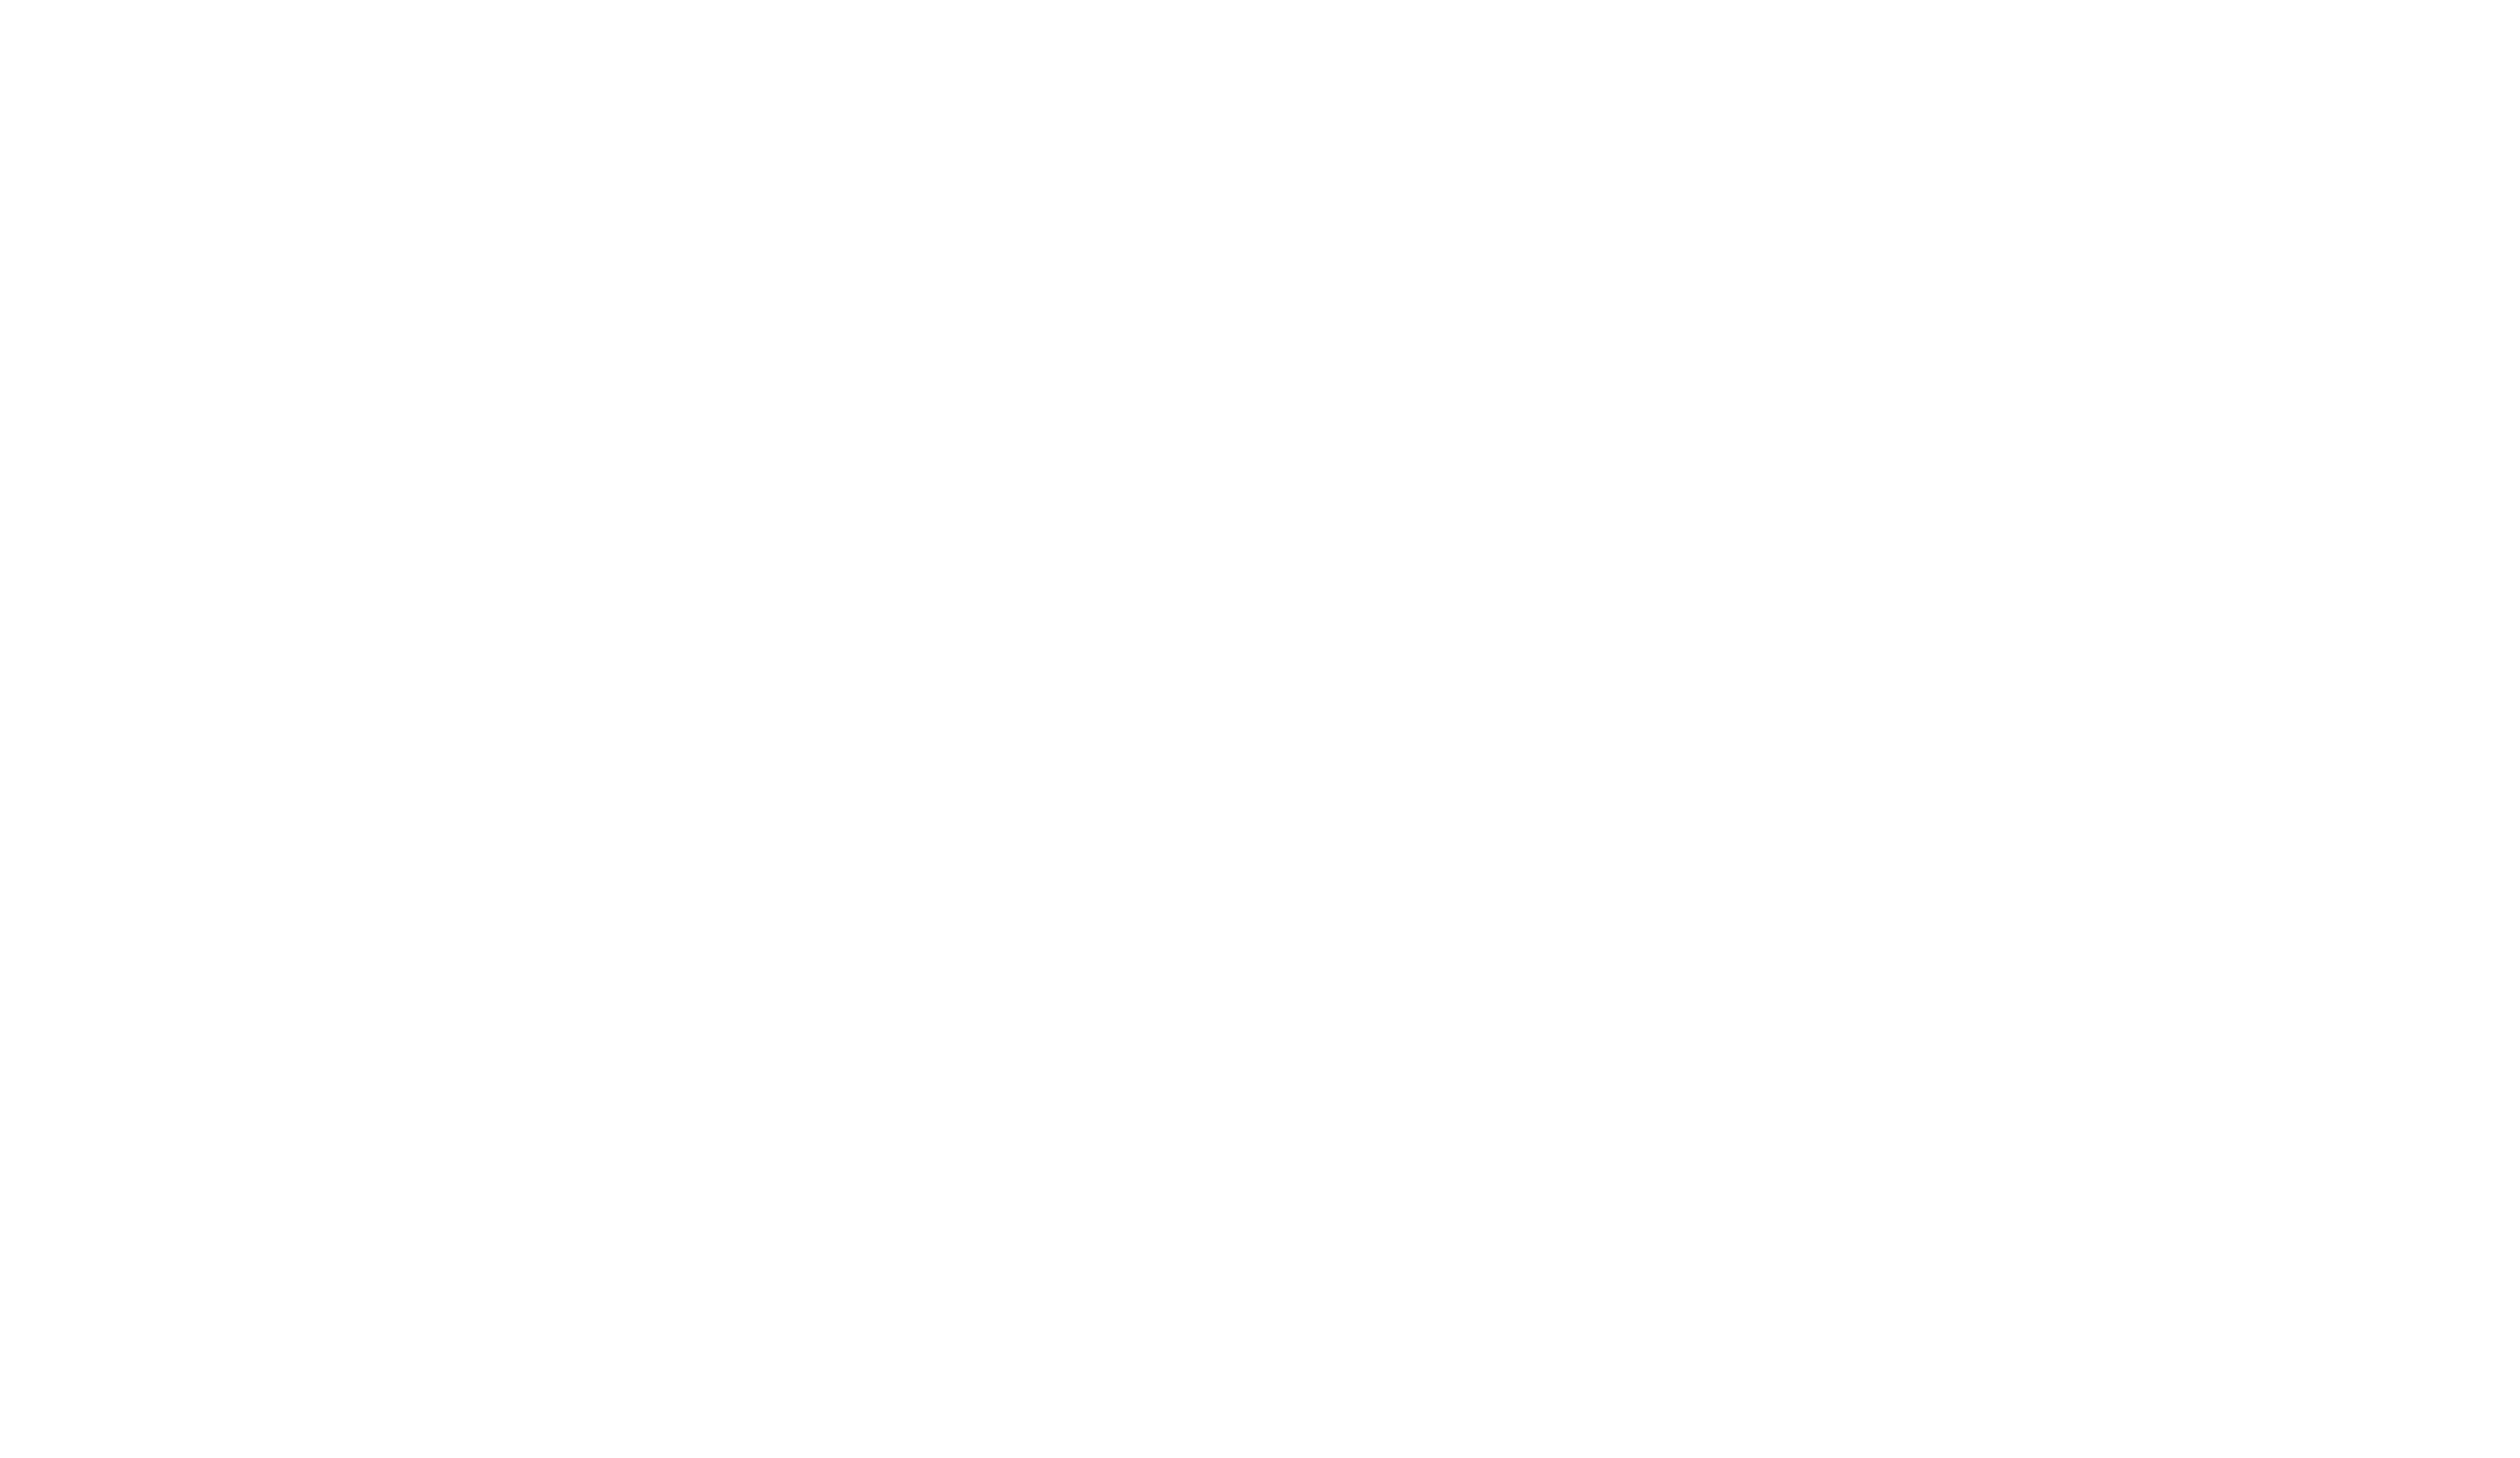 Matteson Gregory 